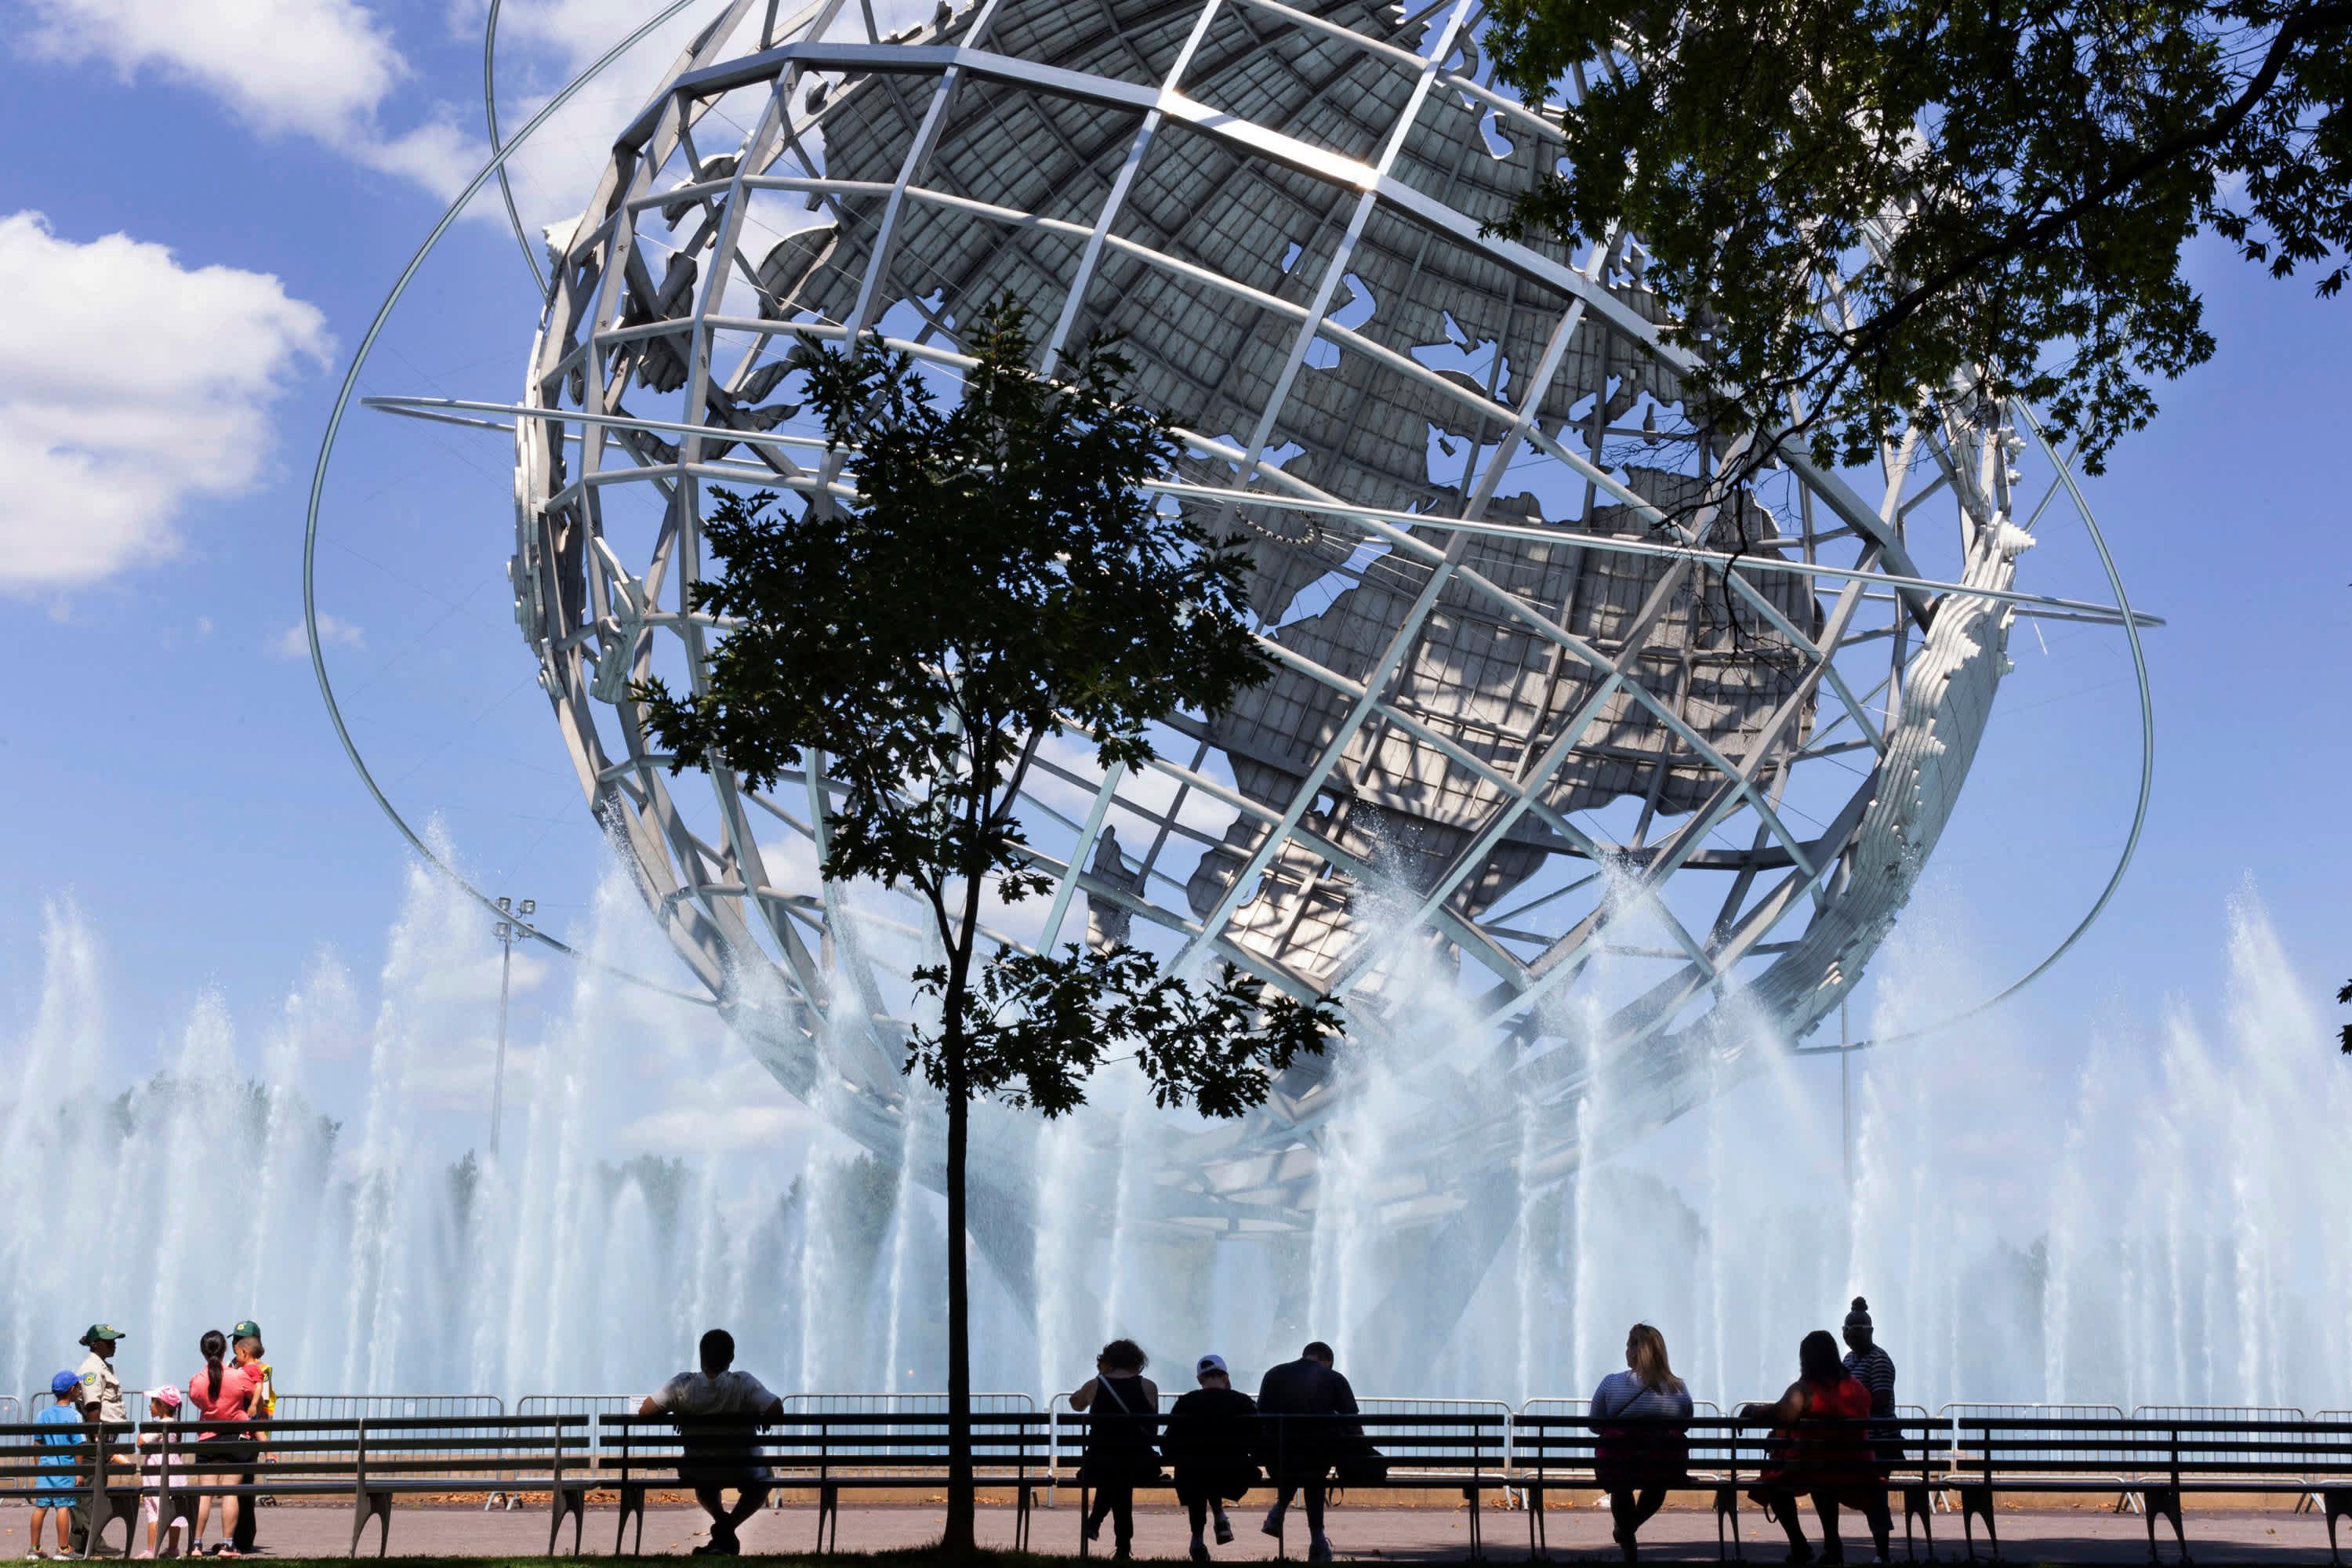 People sitting on a bench while enjoying the view of the Unisphere, steel representation of the Earth in Flushing Meadows–Corona Park, in Queens